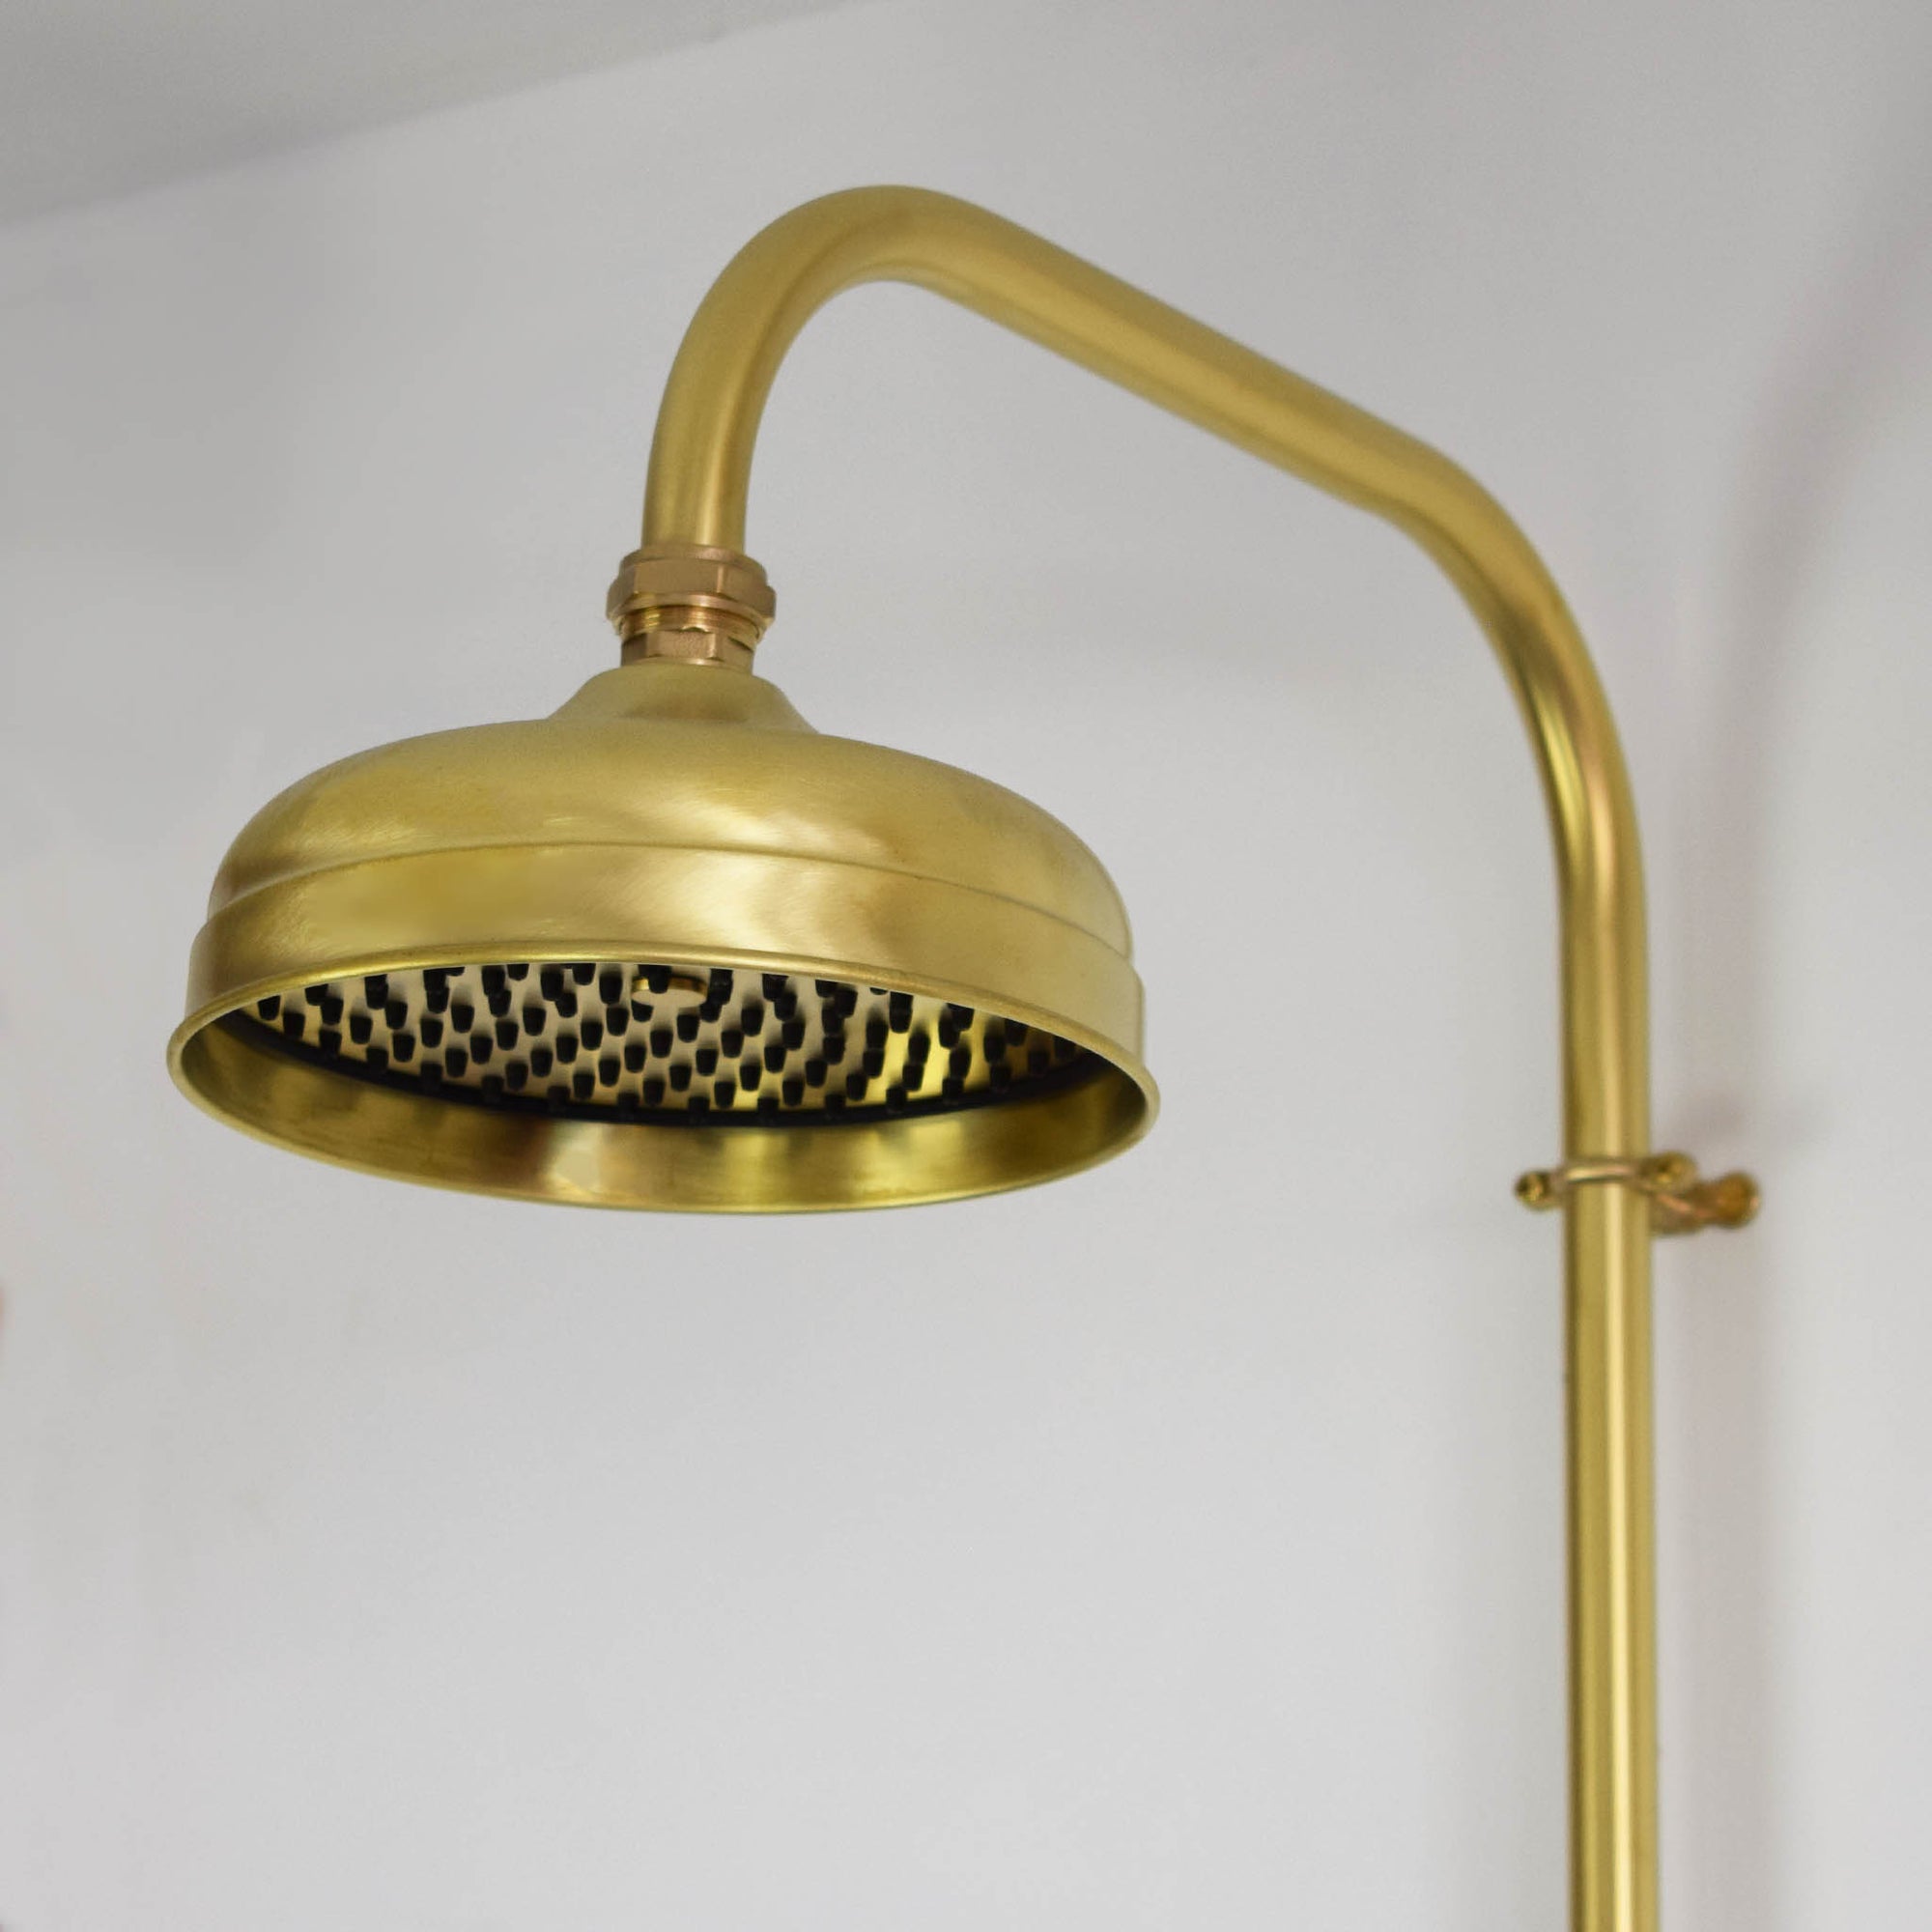 brass thermostatic shower with rainfall shower head, brass shower parts available